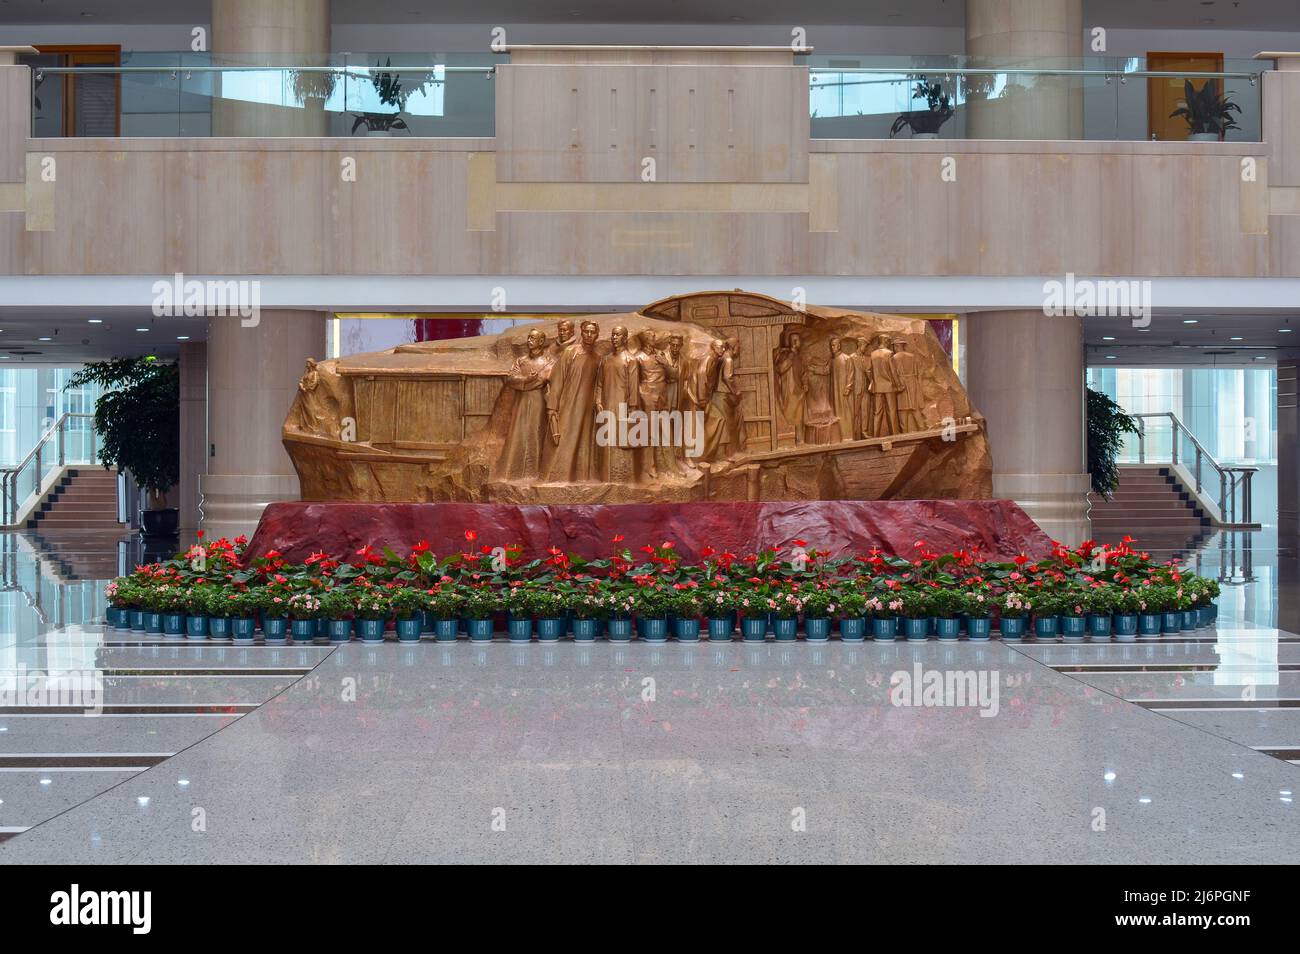 Beautiful Red Boat statue inside the local Government building in Jiaxing, China. Monument to the famous historical boat in the city. Stock Photo